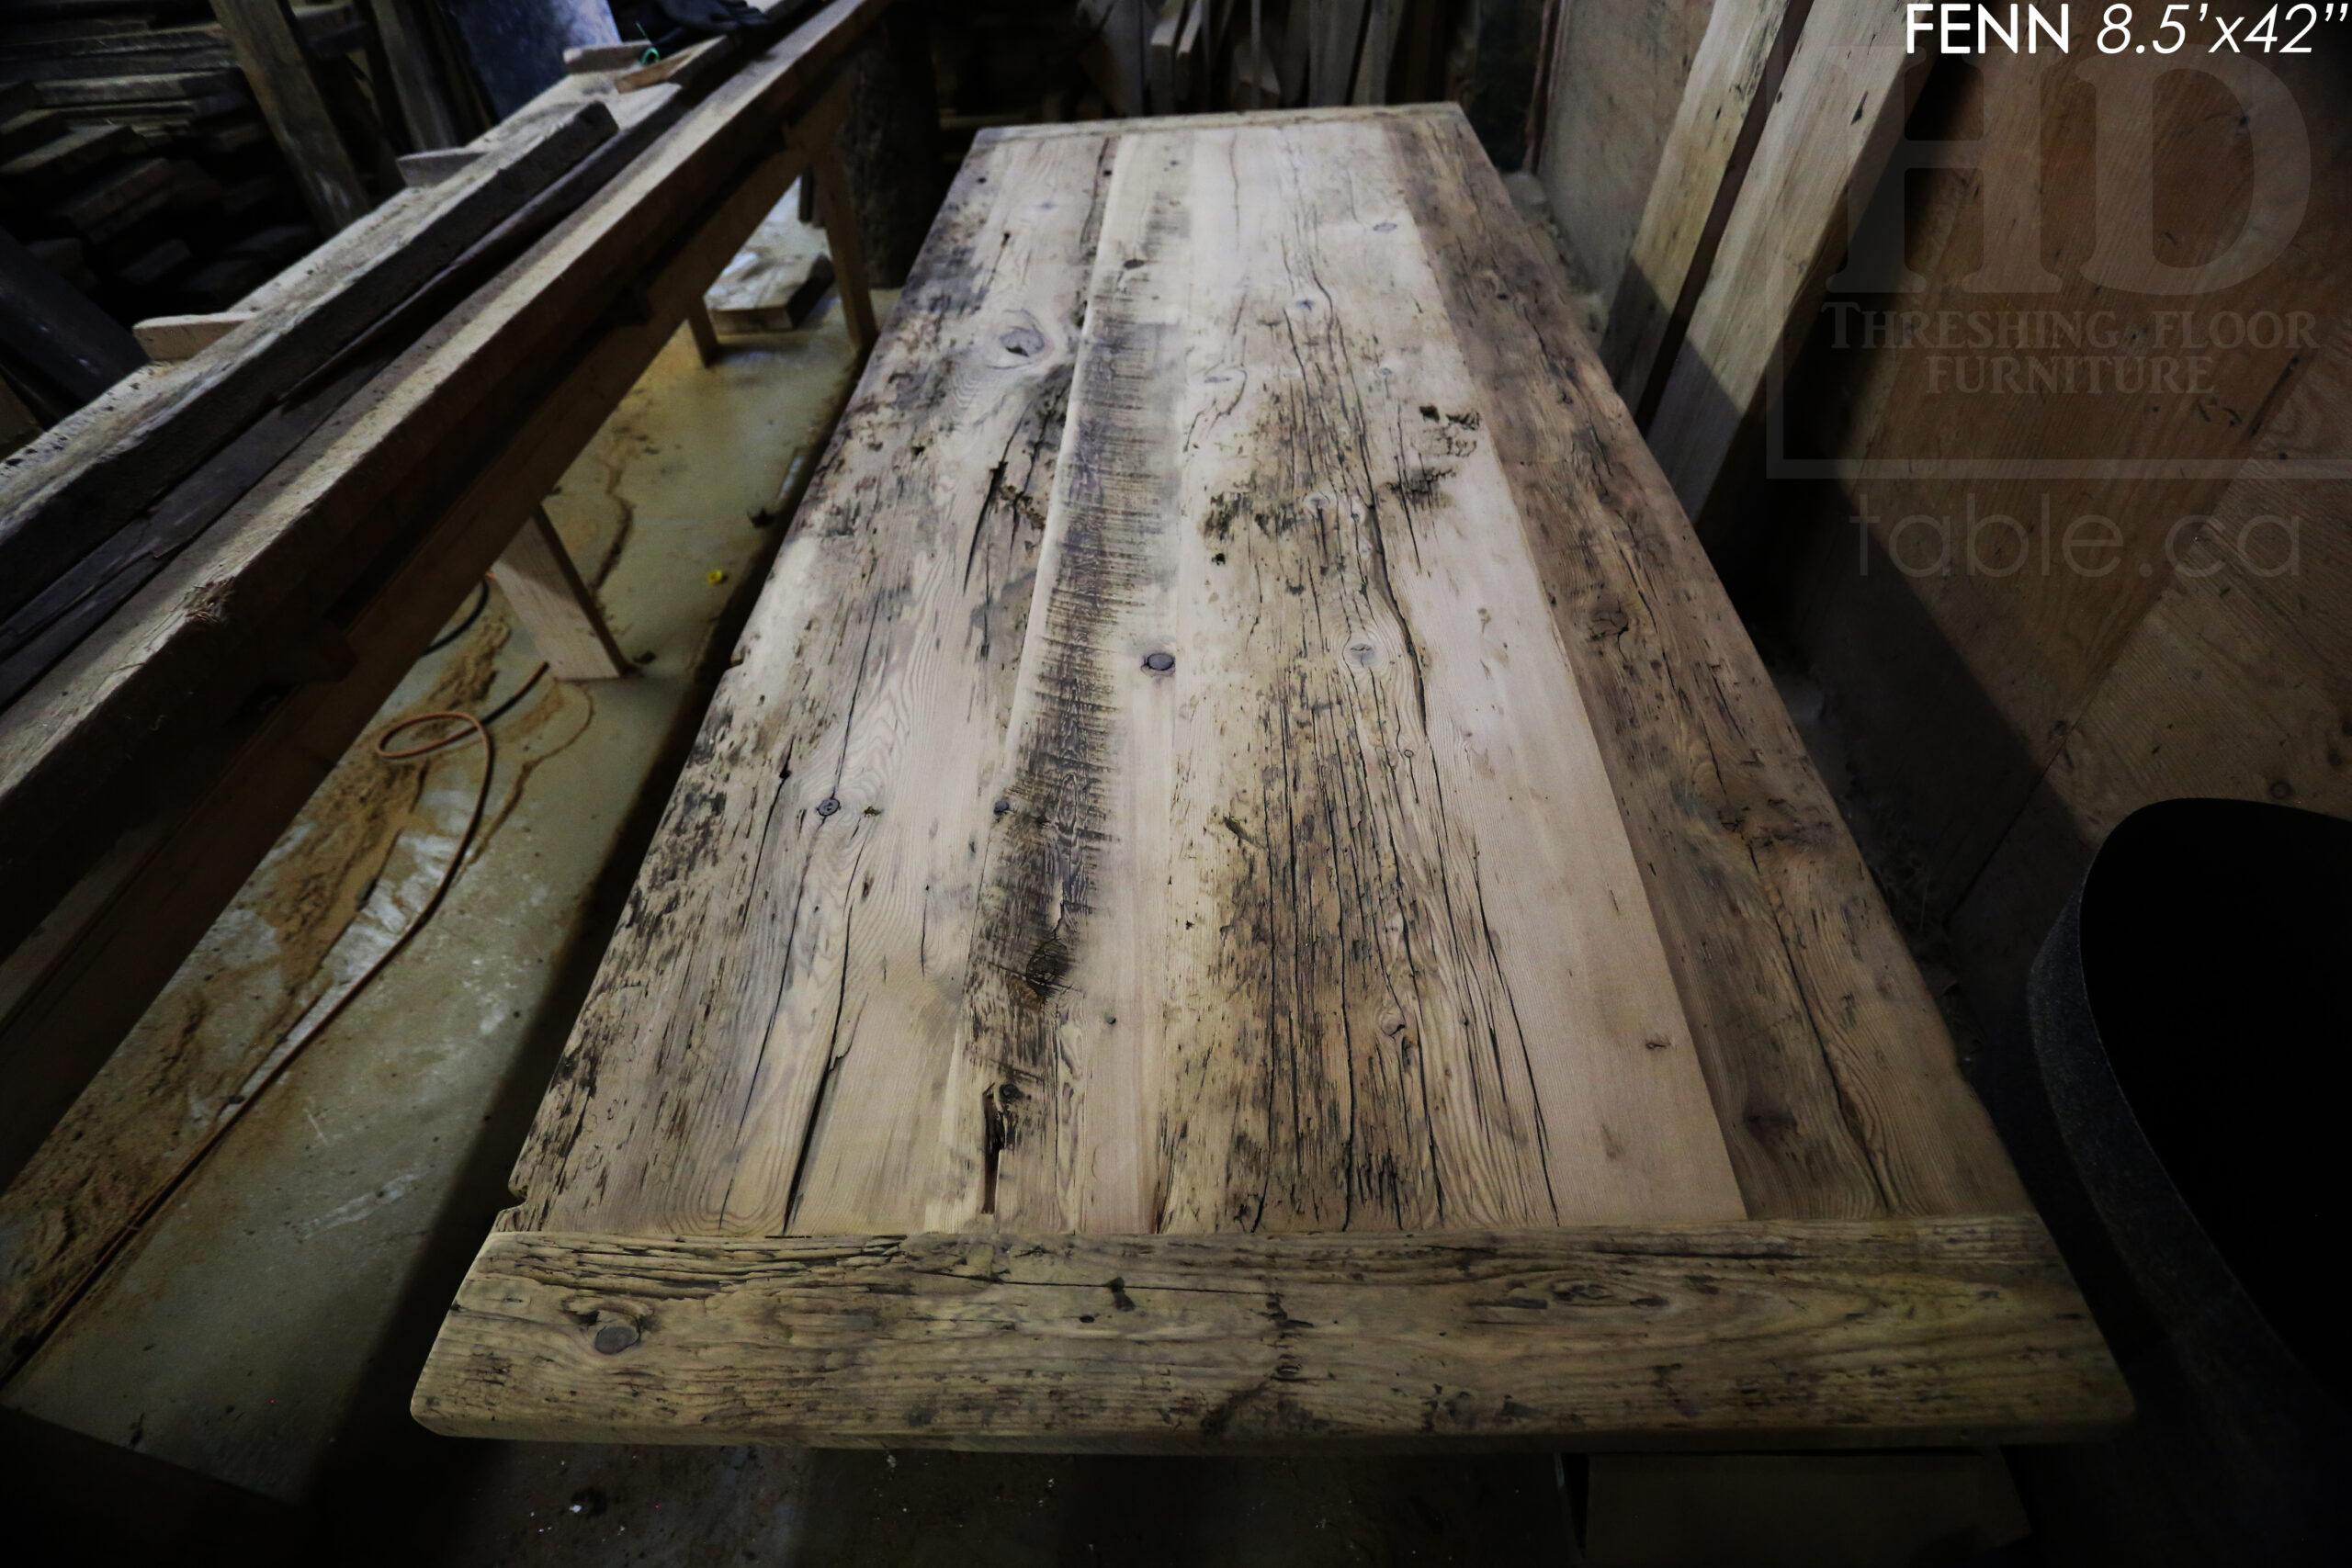 Details: 8.5' Reclaimed Wood Table we made for a Toronto home - 42" wide - Hemlock Threshing Floor Construction - Original barnwood edges & distressing maintained - Premium epoxy + matte polyurethane finish - Matte black metal base - www.table.ca